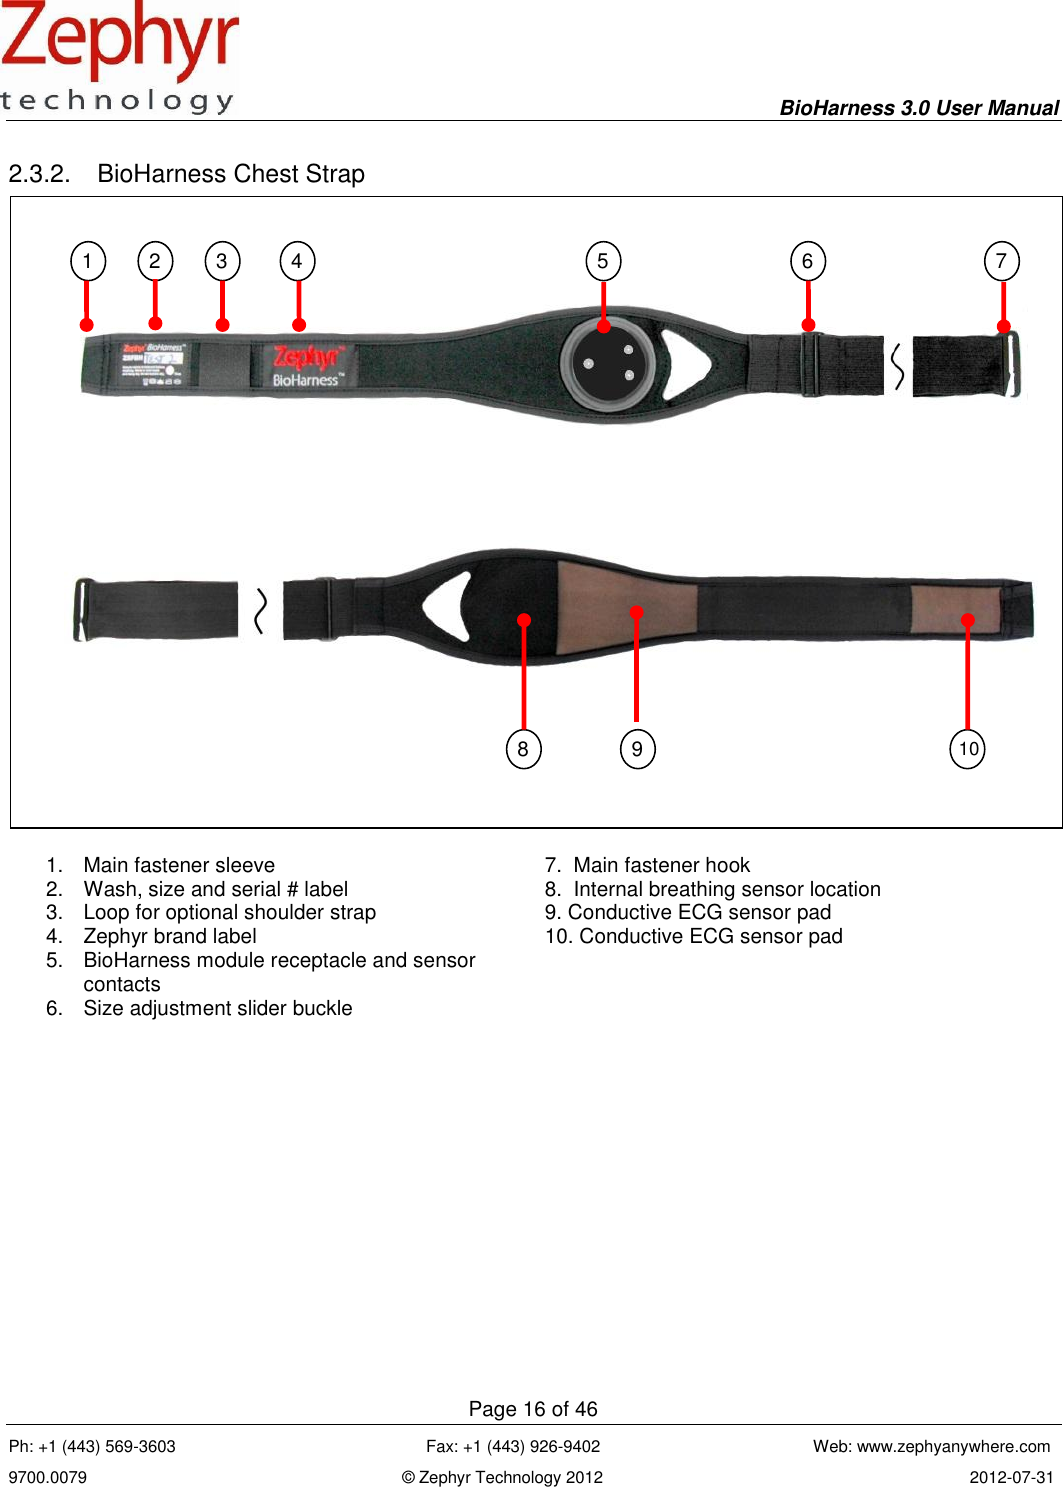     BioHarness 3.0 User Manual  Page 16 of 46 Ph: +1 (443) 569-3603                                                      Fax: +1 (443) 926-9402                                              Web: www.zephyanywhere.com 9700.0079                                                                    © Zephyr Technology 2012                                                                               2012-07-31                                                                                                                                      2.3.2.  BioHarness Chest Strap   1.  Main fastener sleeve 7.  Main fastener hook 2.  Wash, size and serial # label 8.  Internal breathing sensor location 3.  Loop for optional shoulder strap 9. Conductive ECG sensor pad 4.  Zephyr brand label 10. Conductive ECG sensor pad 5.  BioHarness module receptacle and sensor contacts  6.  Size adjustment slider buckle   1 2 3 4 5 6 7 8 9 10 